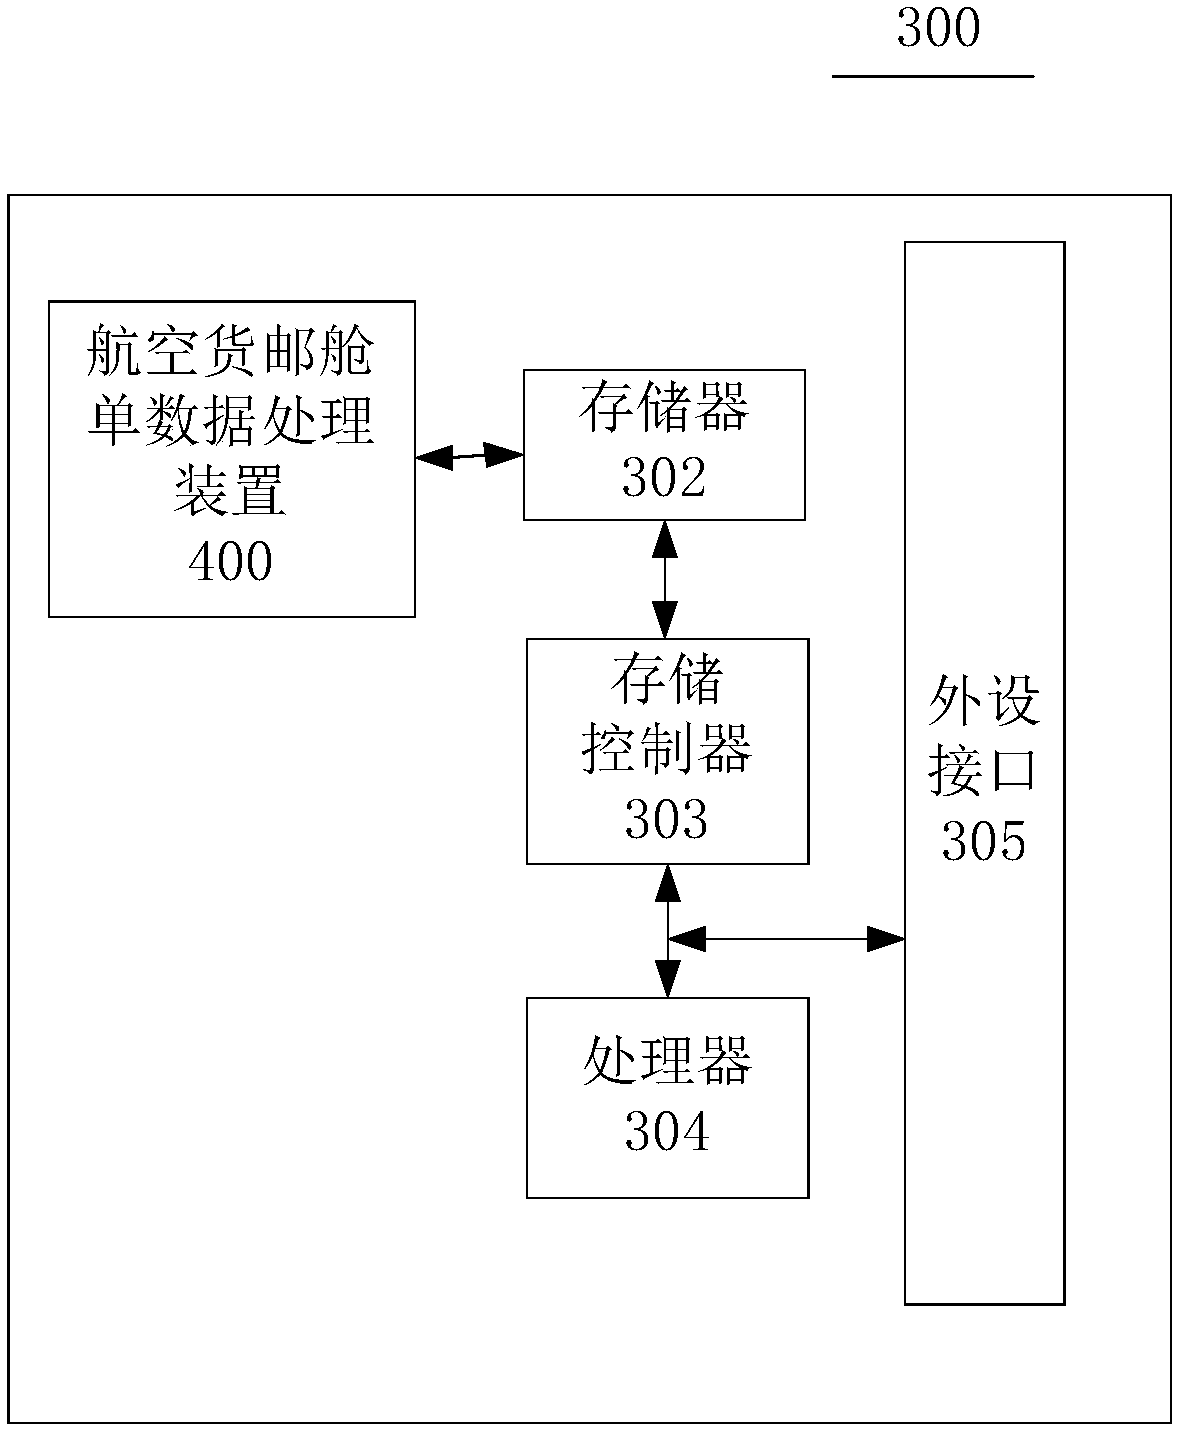 Air cargo shipping bill data processing method and device